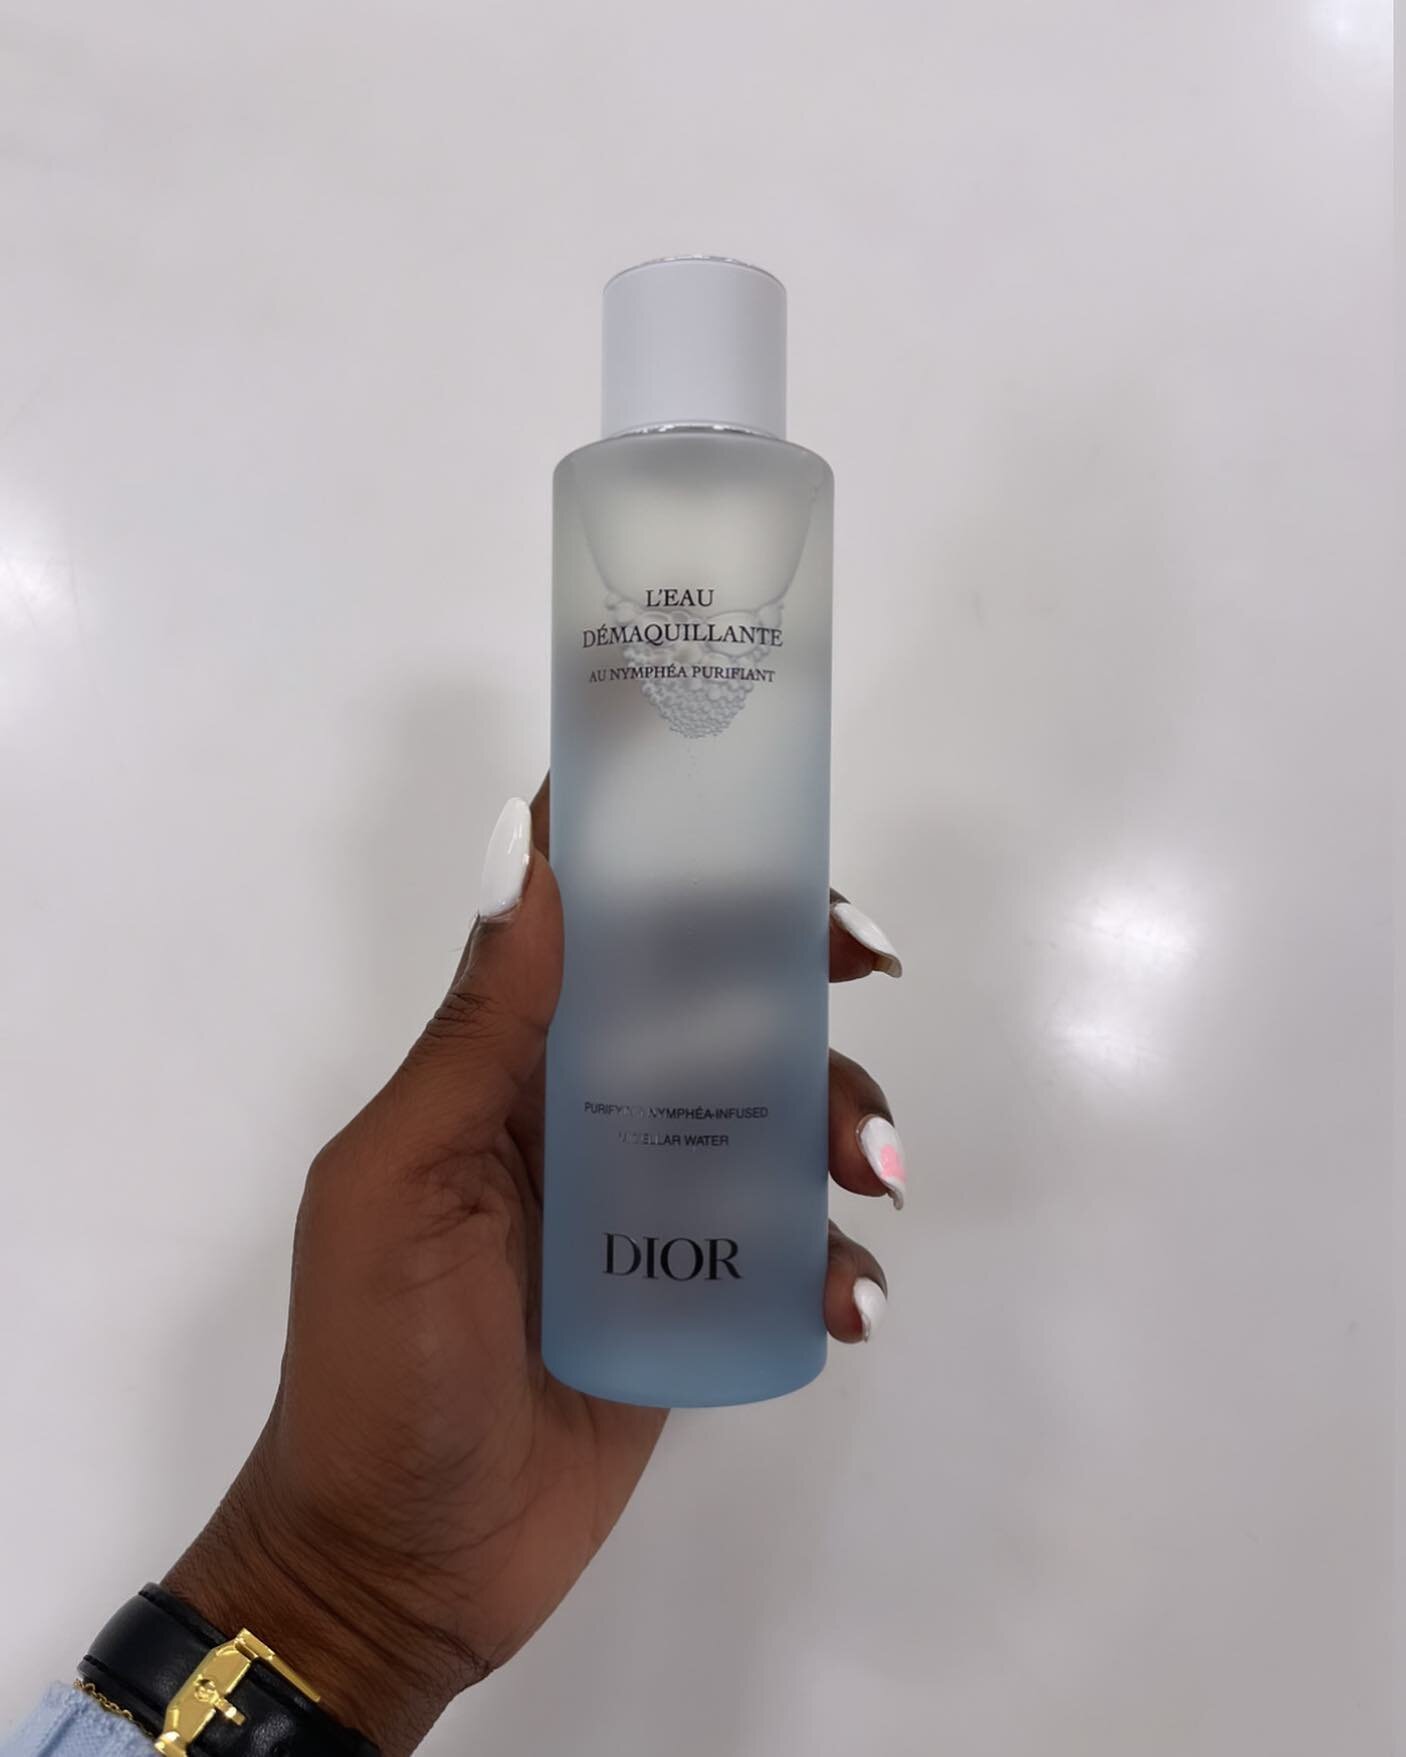 New Product :  @diorbeauty Micellar Water 💦 Moisturize your Skin and Remove your Makeup before applying your face wash to effectively double cleanse your skin. Also, use it in the am to refresh your skin before applying your makeup✨

How to use - Ap